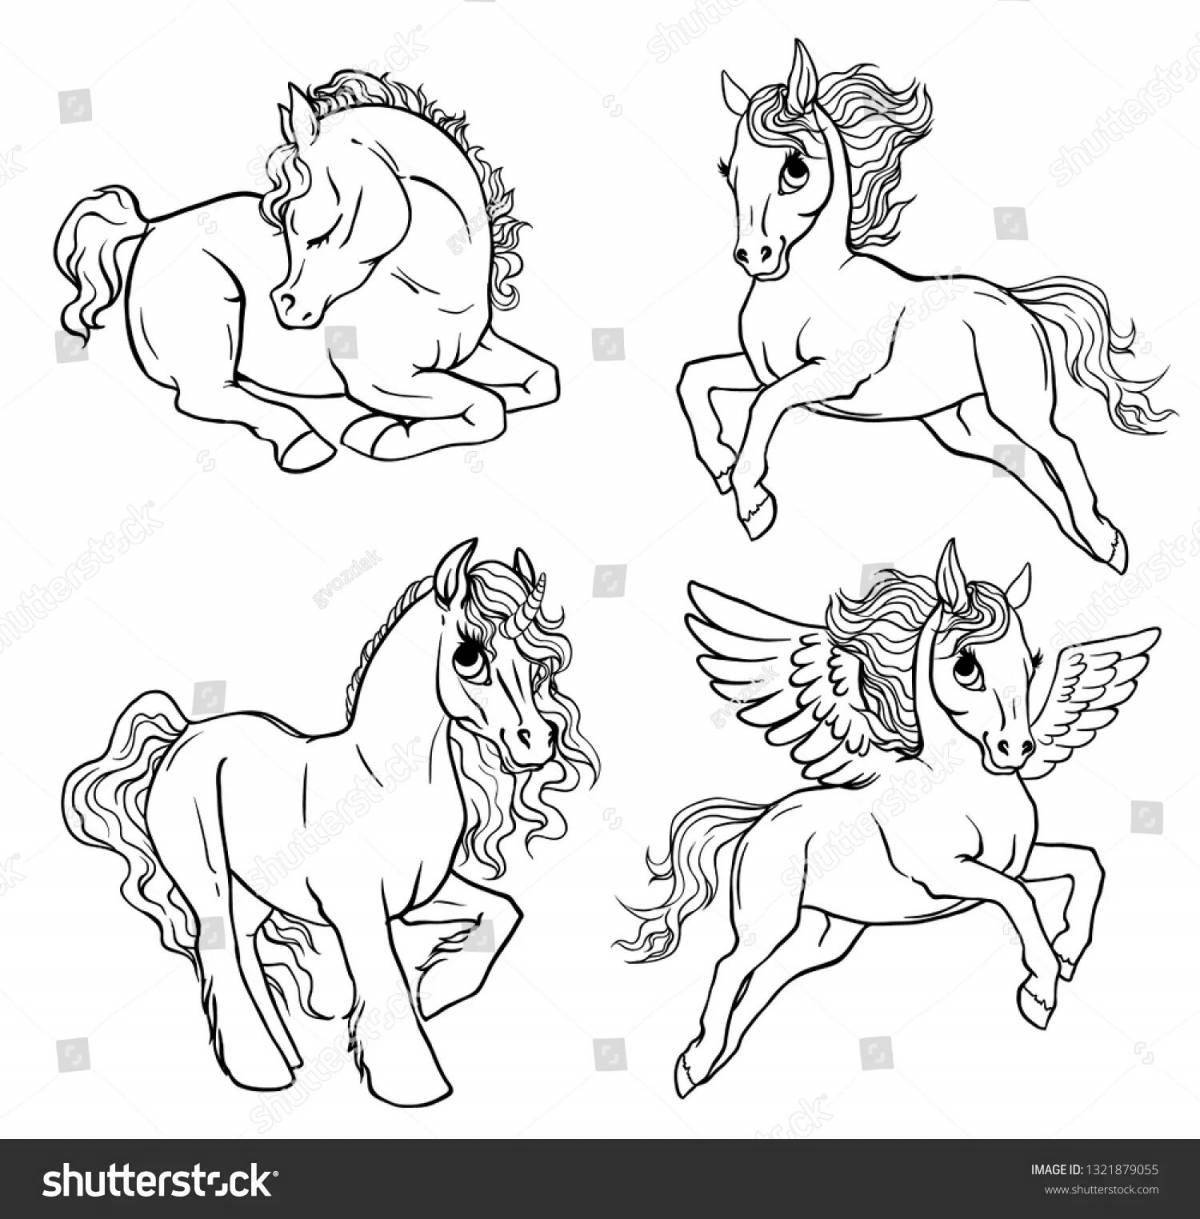 Great coloring of many unicorns